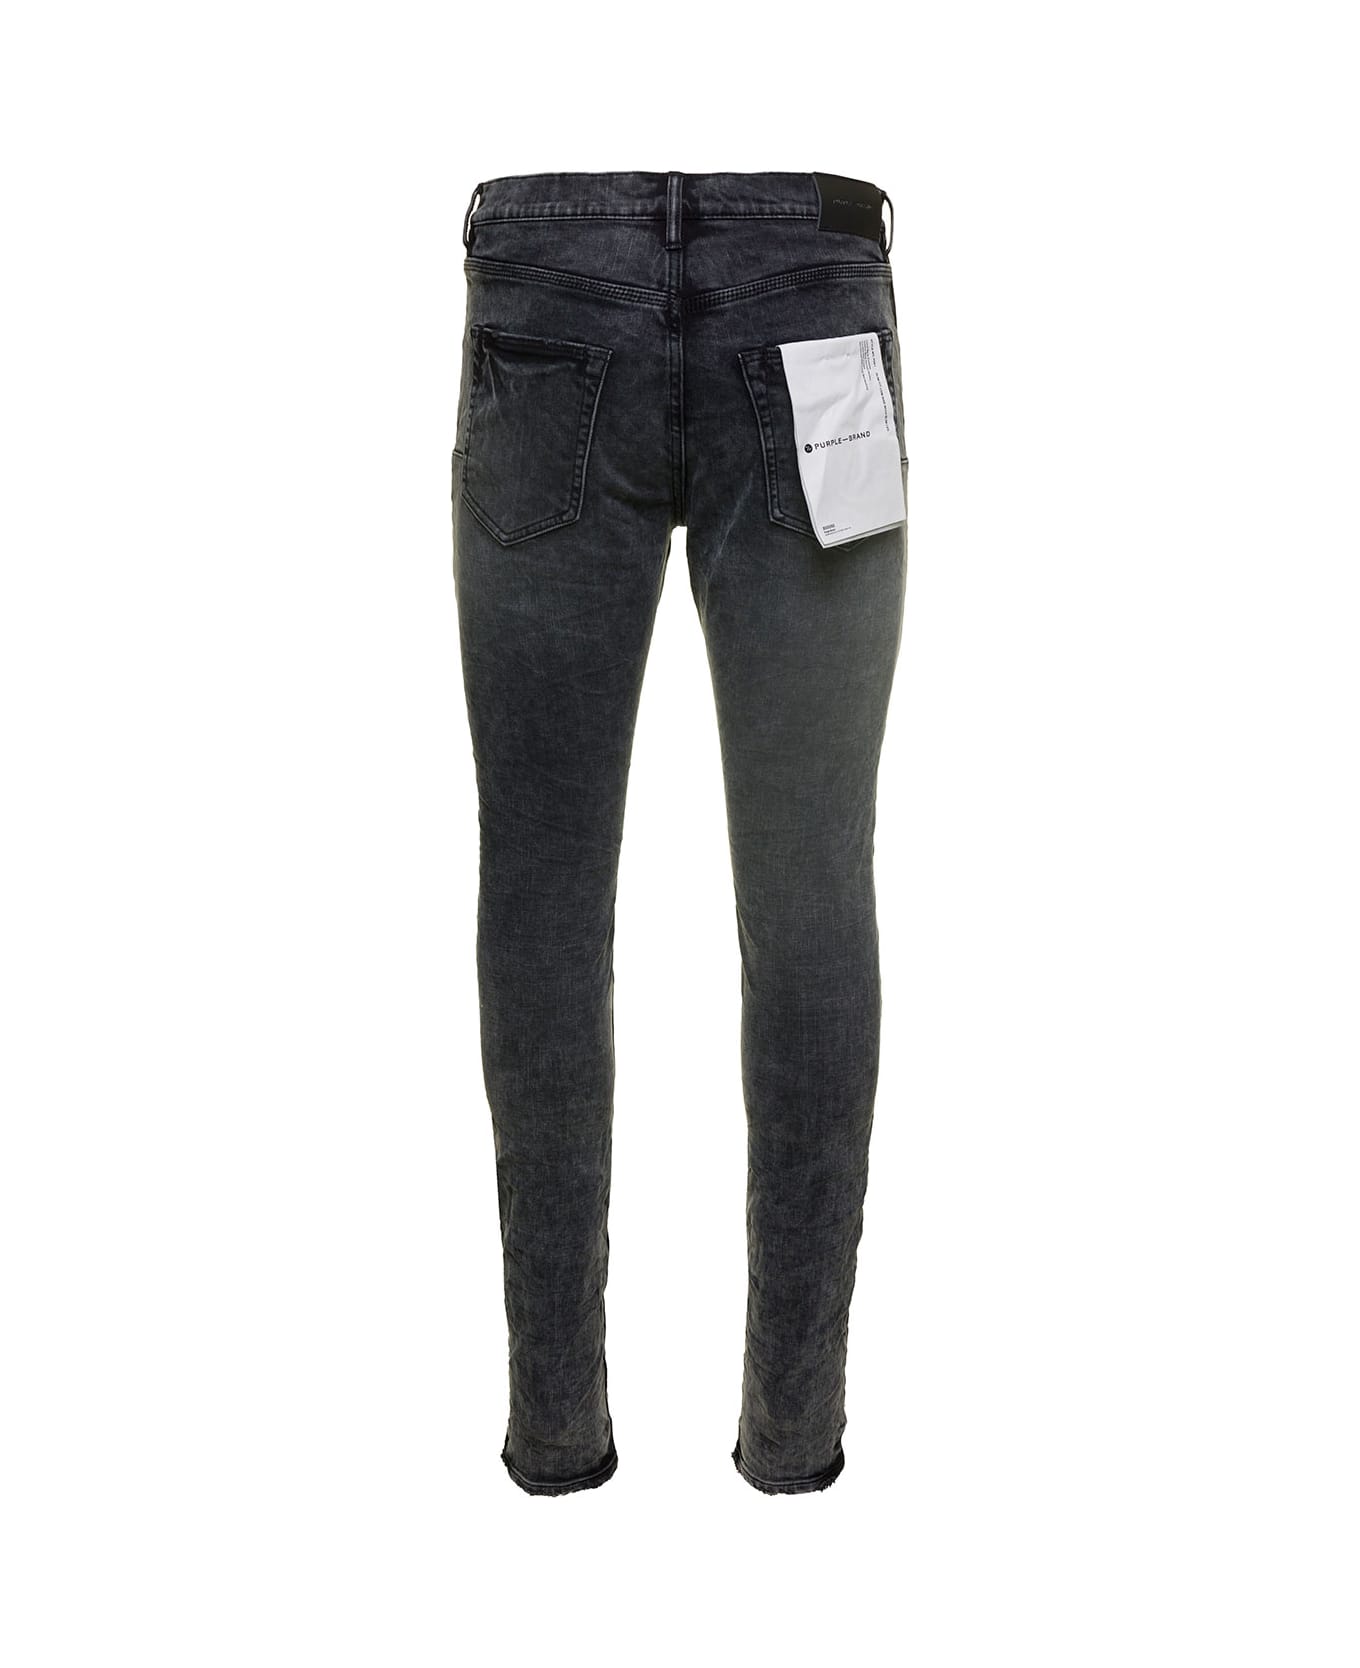 Purple Brand Black Skinny Jeans With Tonal Logo Patch And Crinkled Effect In Stretch Cotton Denim Man - Black デニム